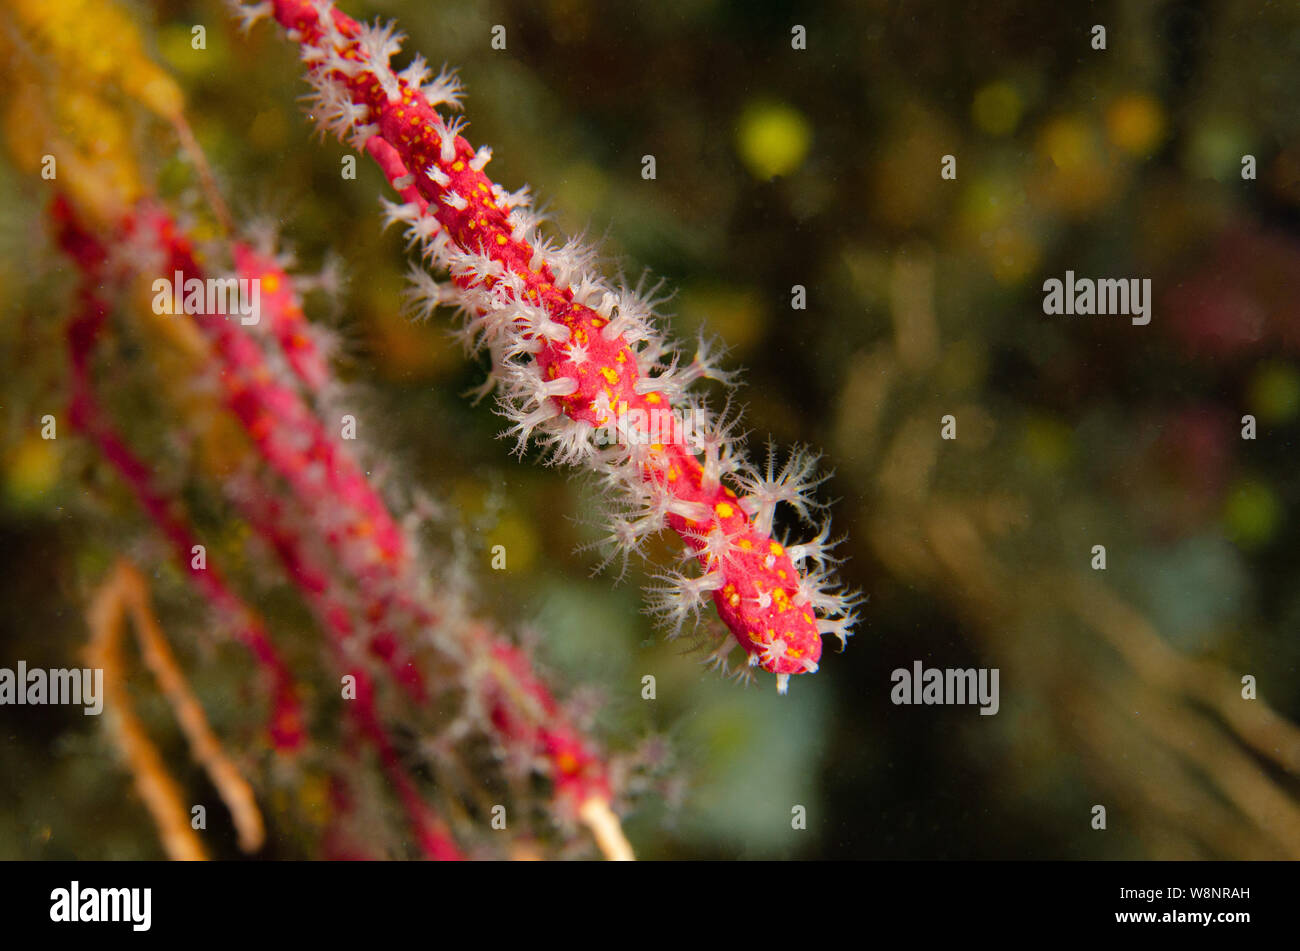 False Red Coral, Parerythropodium coralloides, Alcyoniidae, Tor Paterno Marine Protected Area, Rome, Italy, Mediterranean Sea Stock Photo